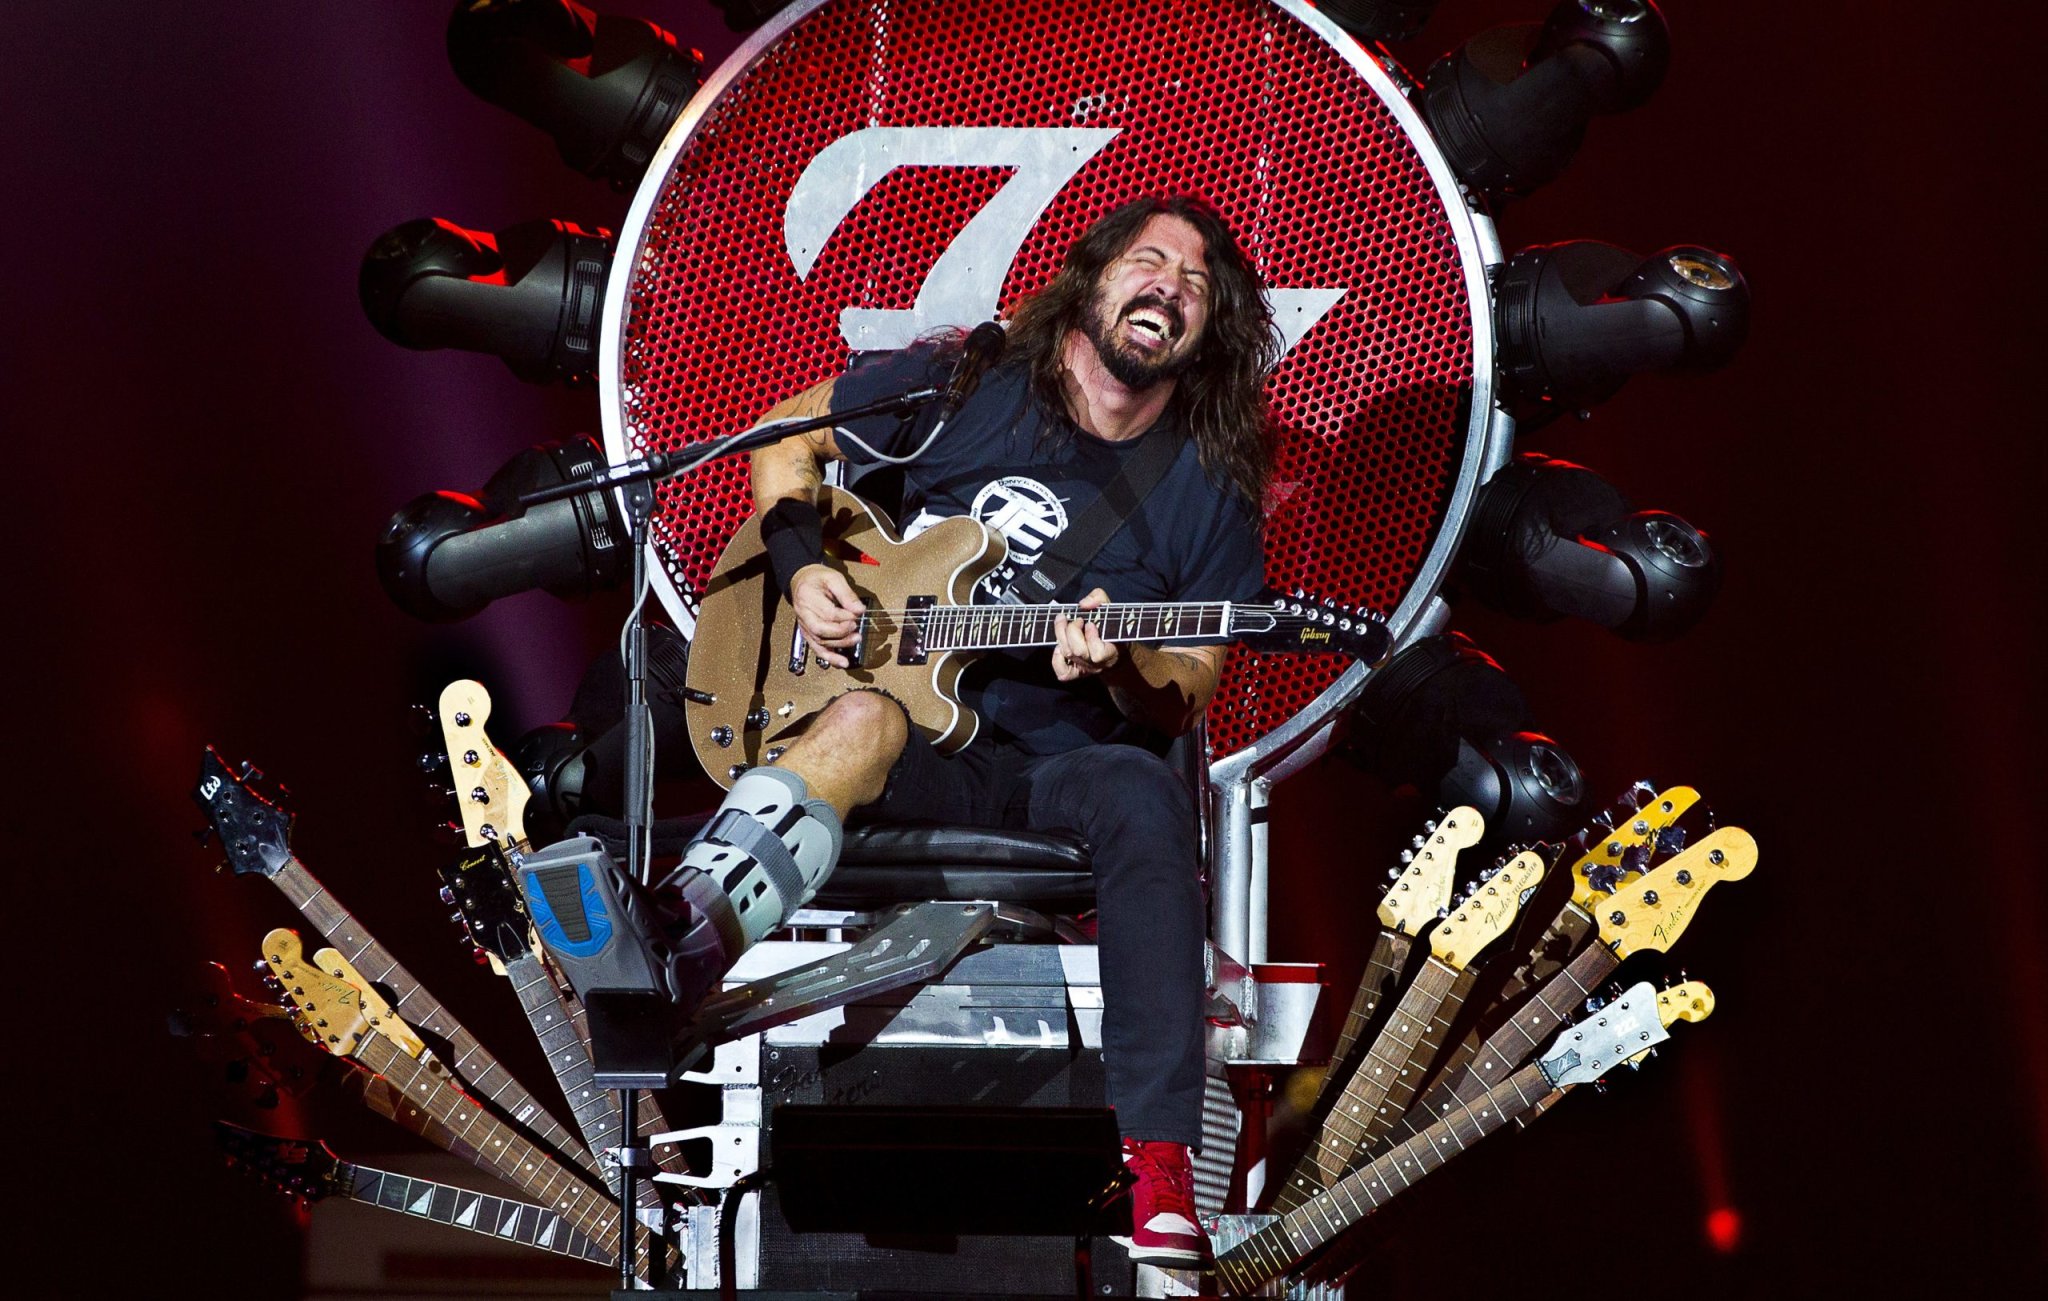 Dave Grohl Lends His Throne to Greyhawk Bassist Who Was Shot in the Leg